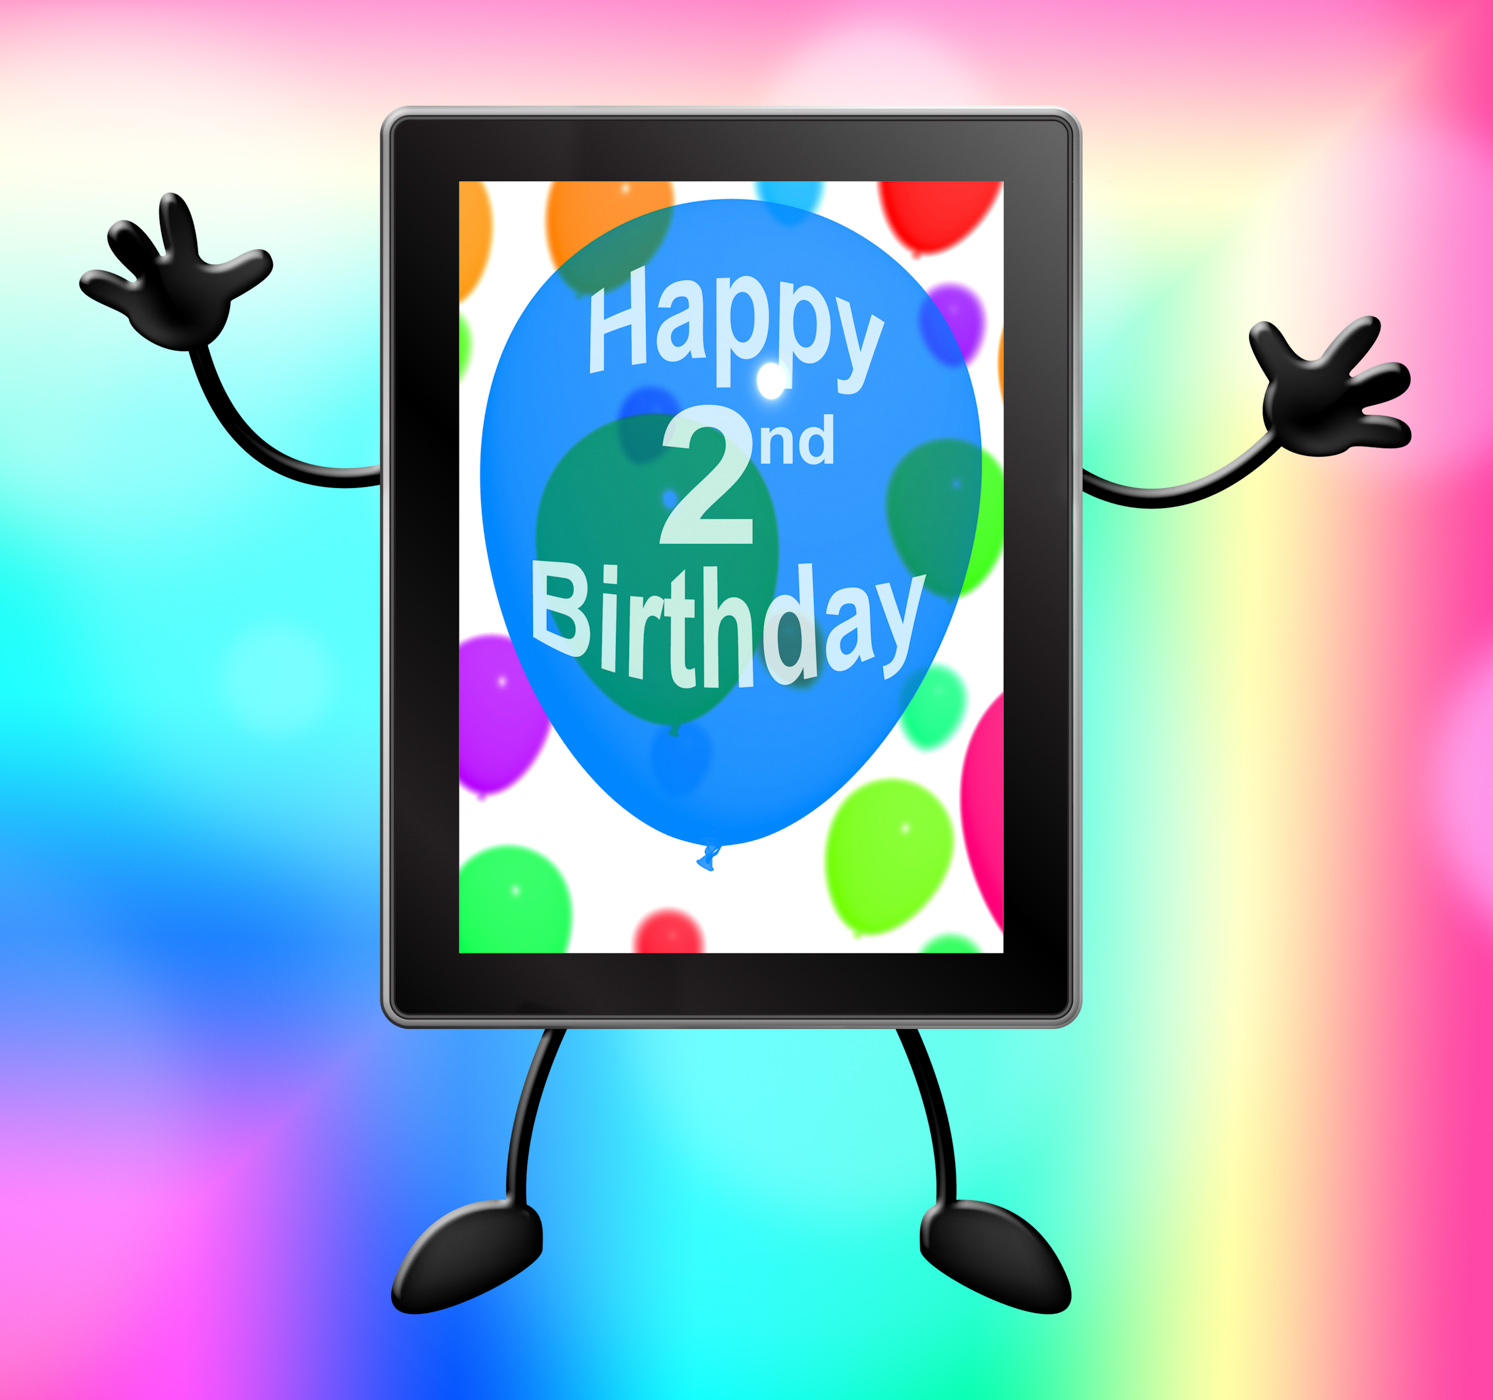 Multicolored balloons for celebrating a 2nd or second birthday tablet photo